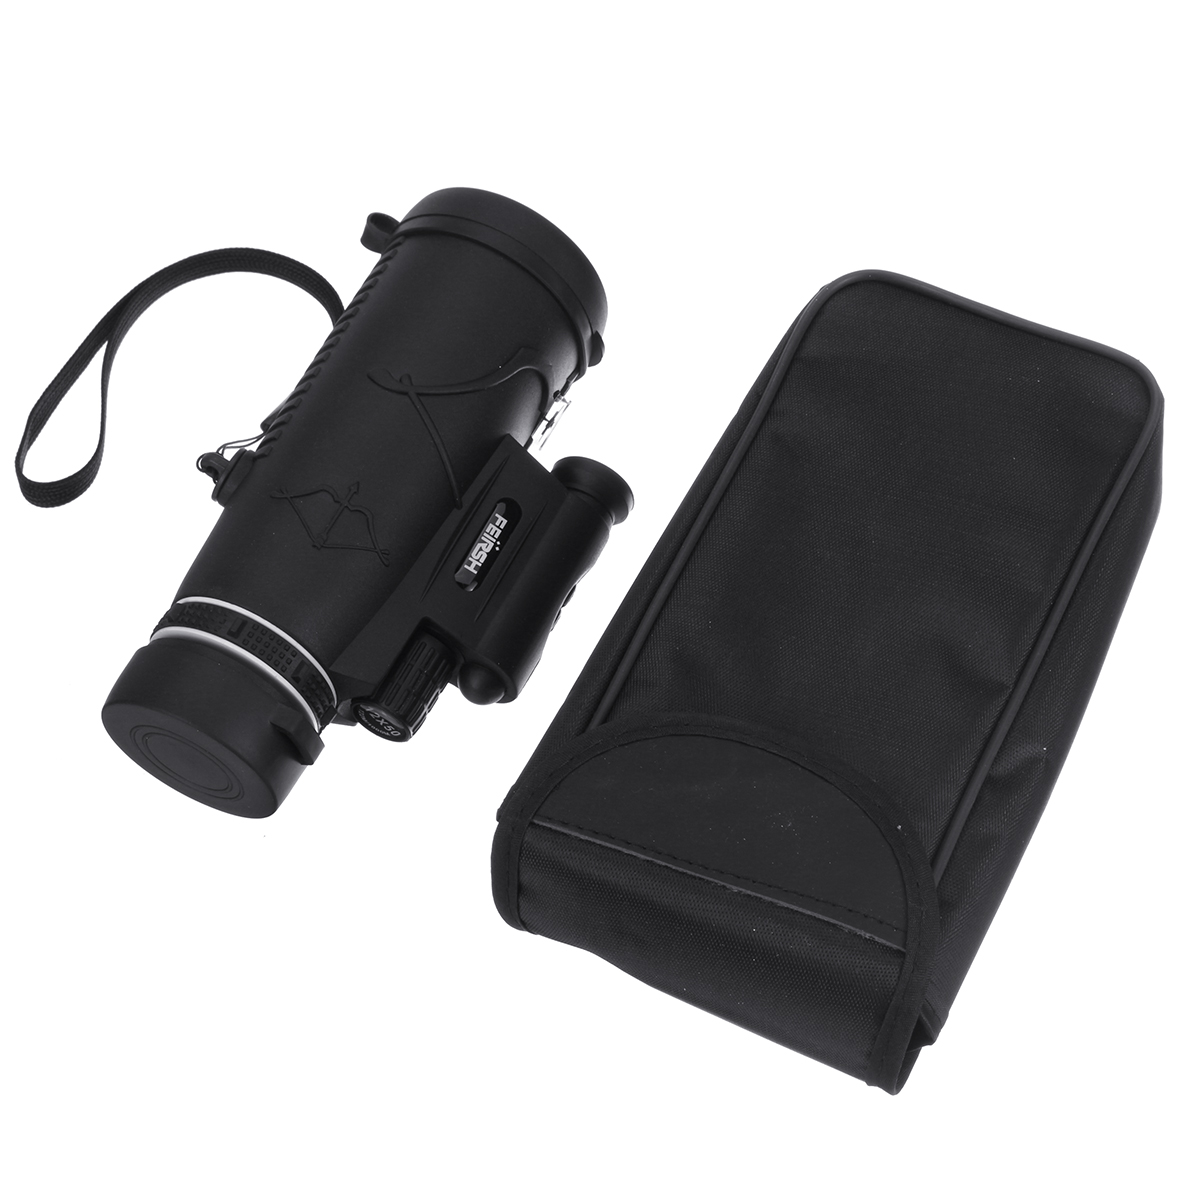 1250-High-Optical-Monocular-with-Laser-Night-Light-Function-Portable-Telescope-for-Bird-Watching-Tar-1858194-14